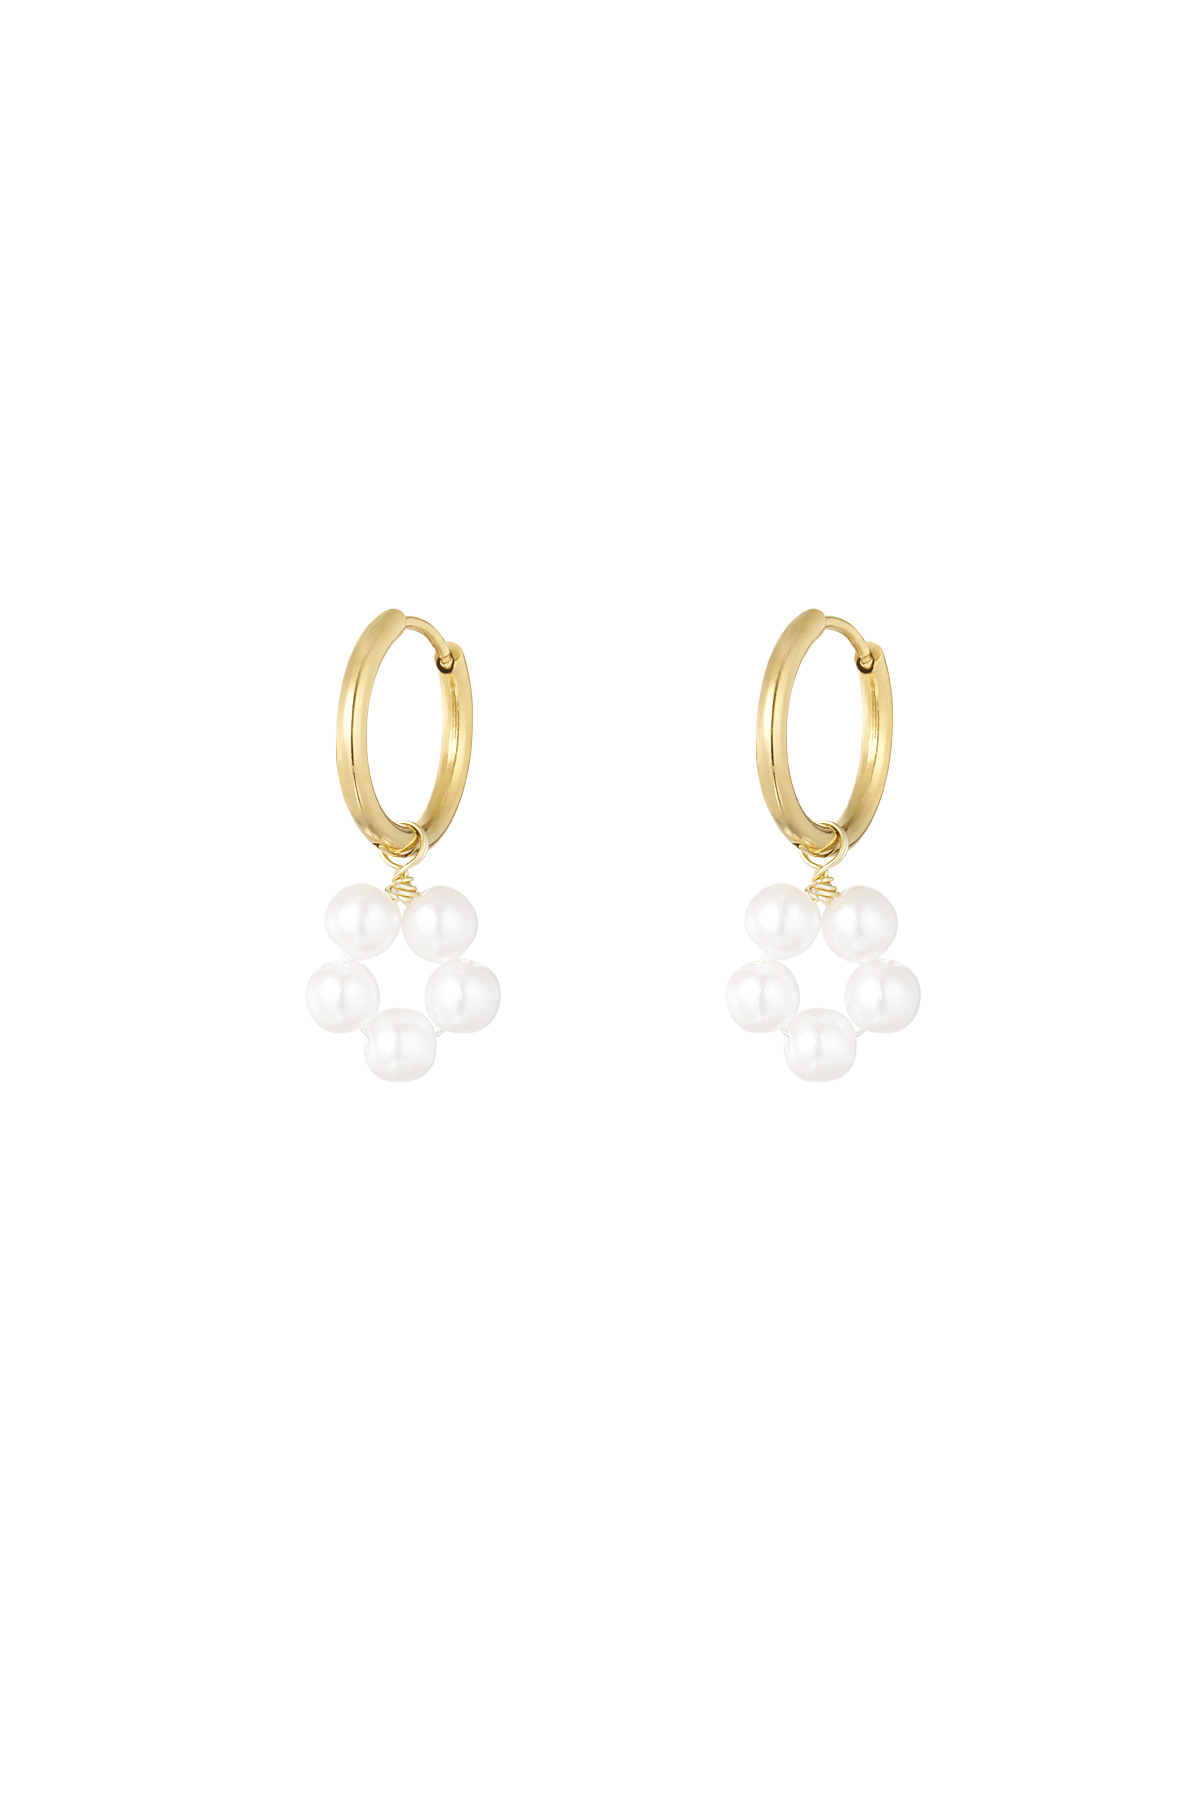 Earring with pearl flower pendant - gold